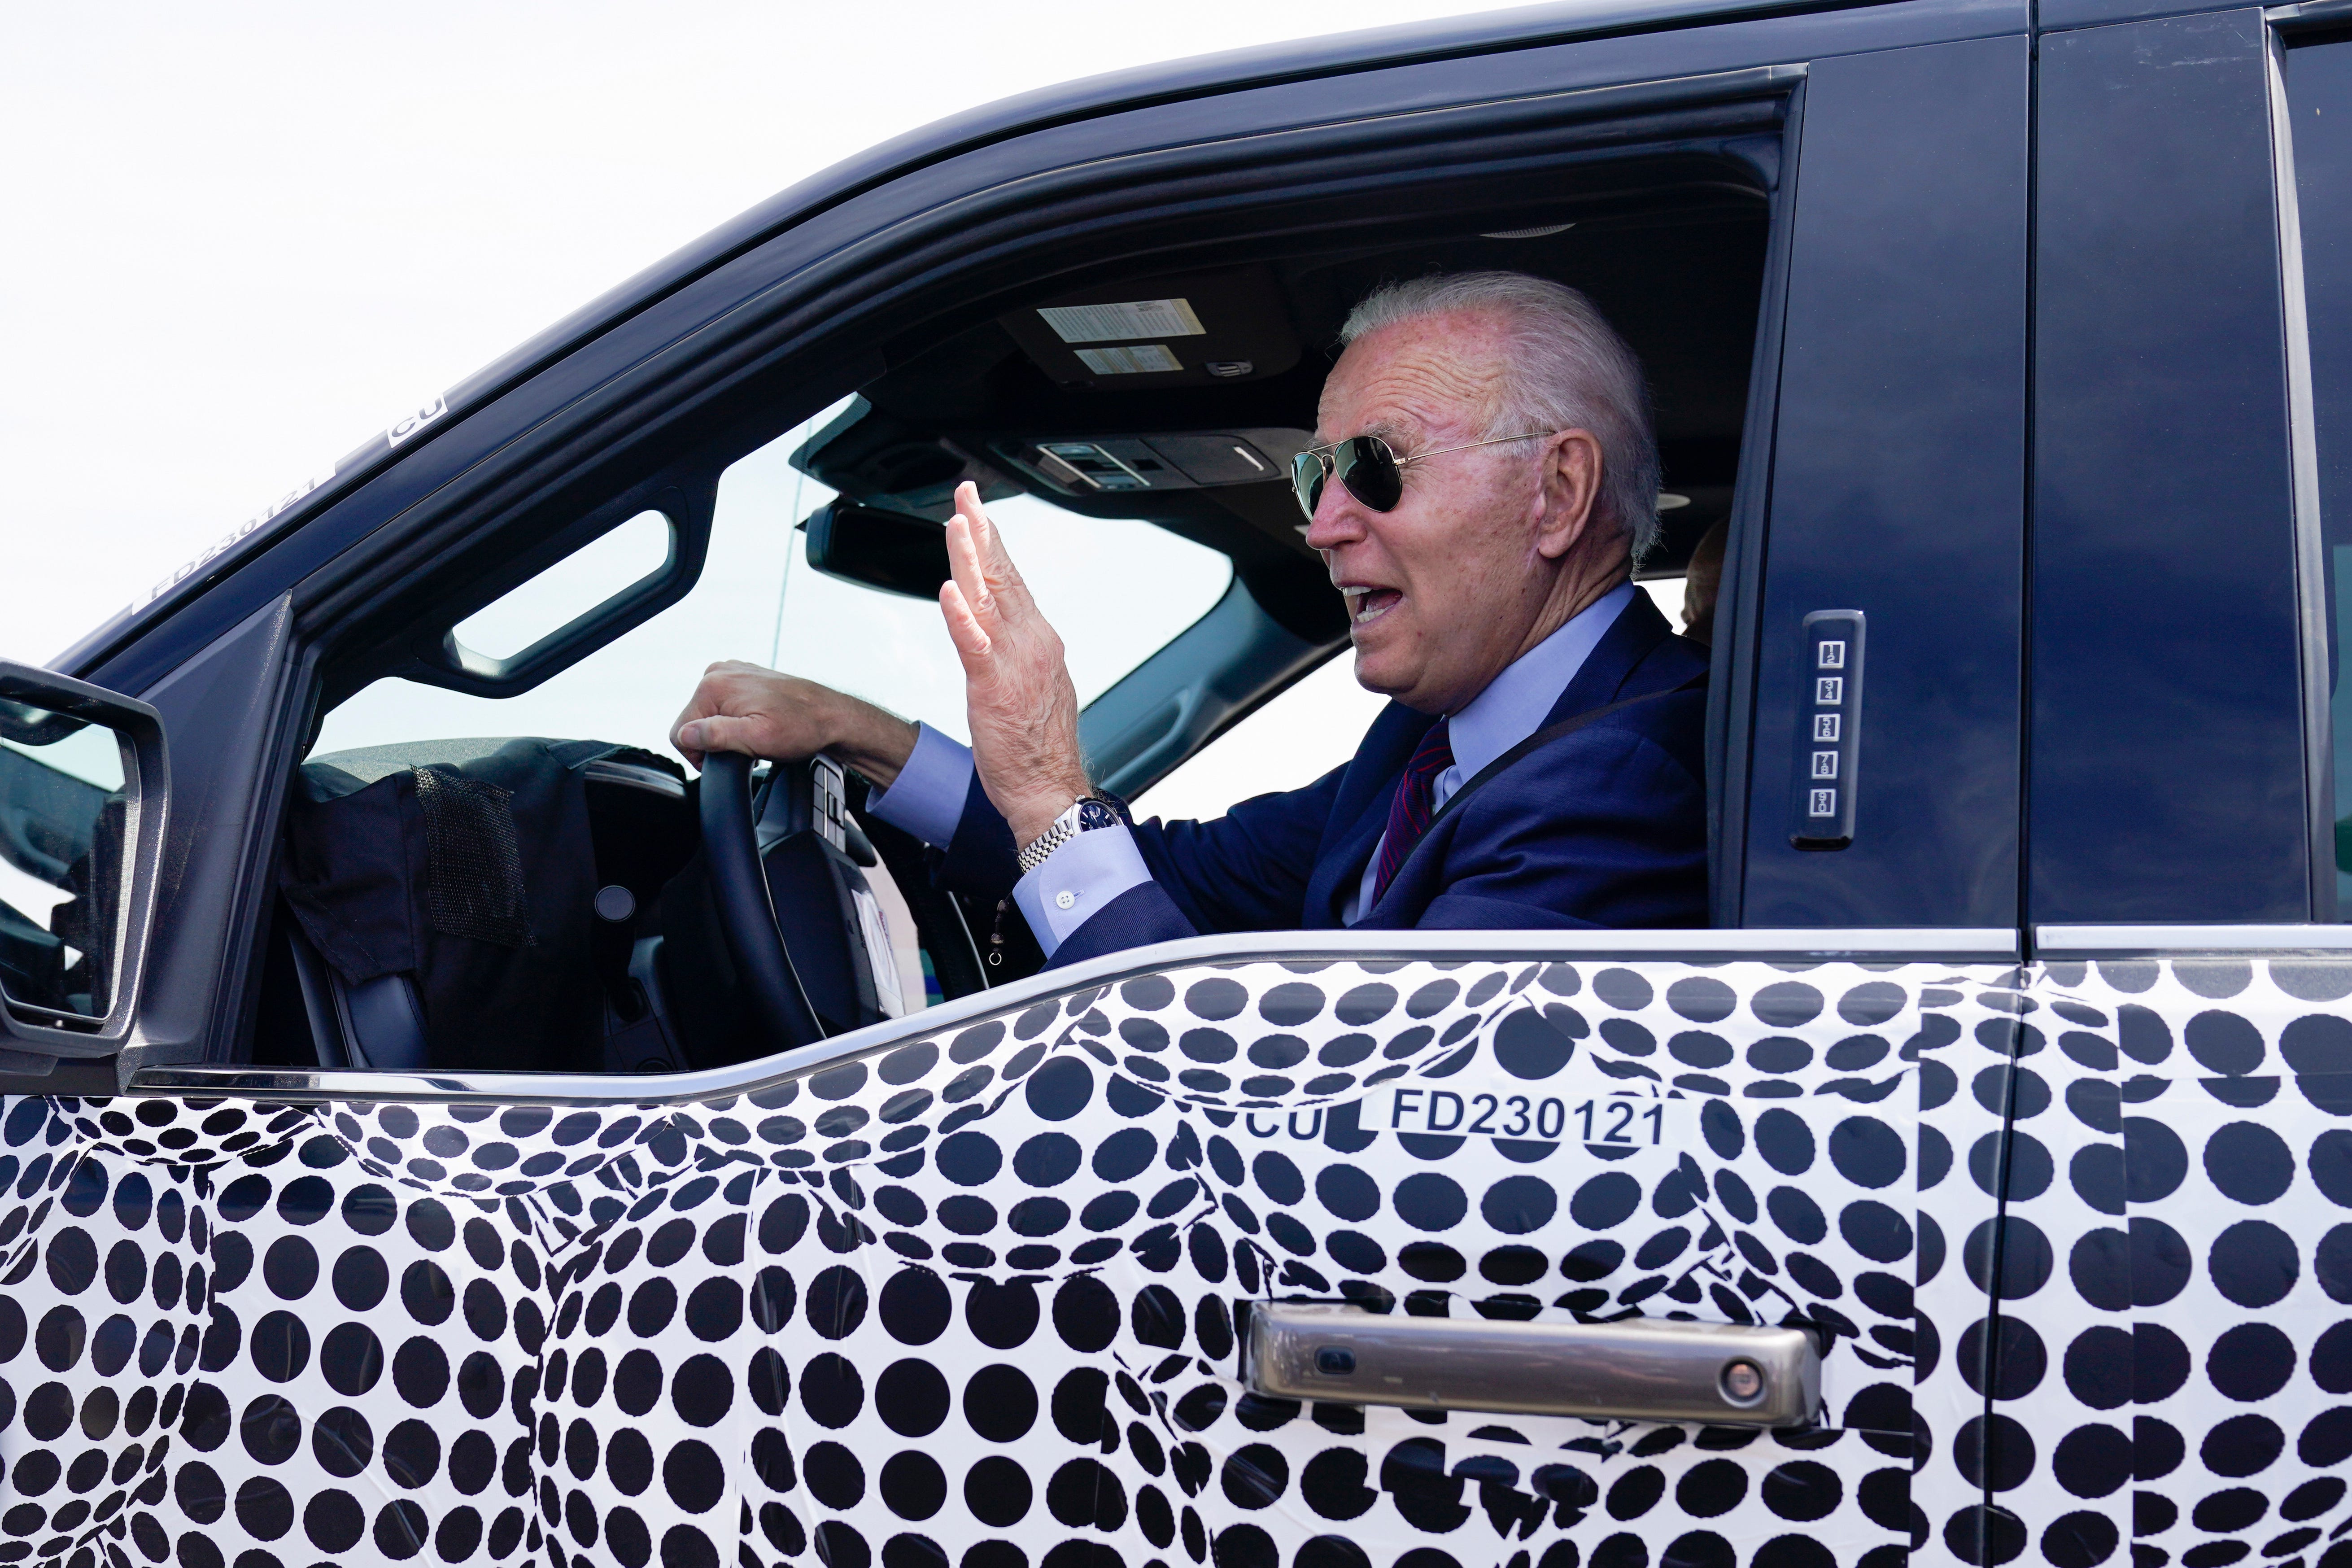 President Joe Biden stops to talk to the media as he drives a Ford F-150 Lightning truck at Ford Dearborn Development Center, Tuesday, May 18, 2021, in Dearborn, Mich.